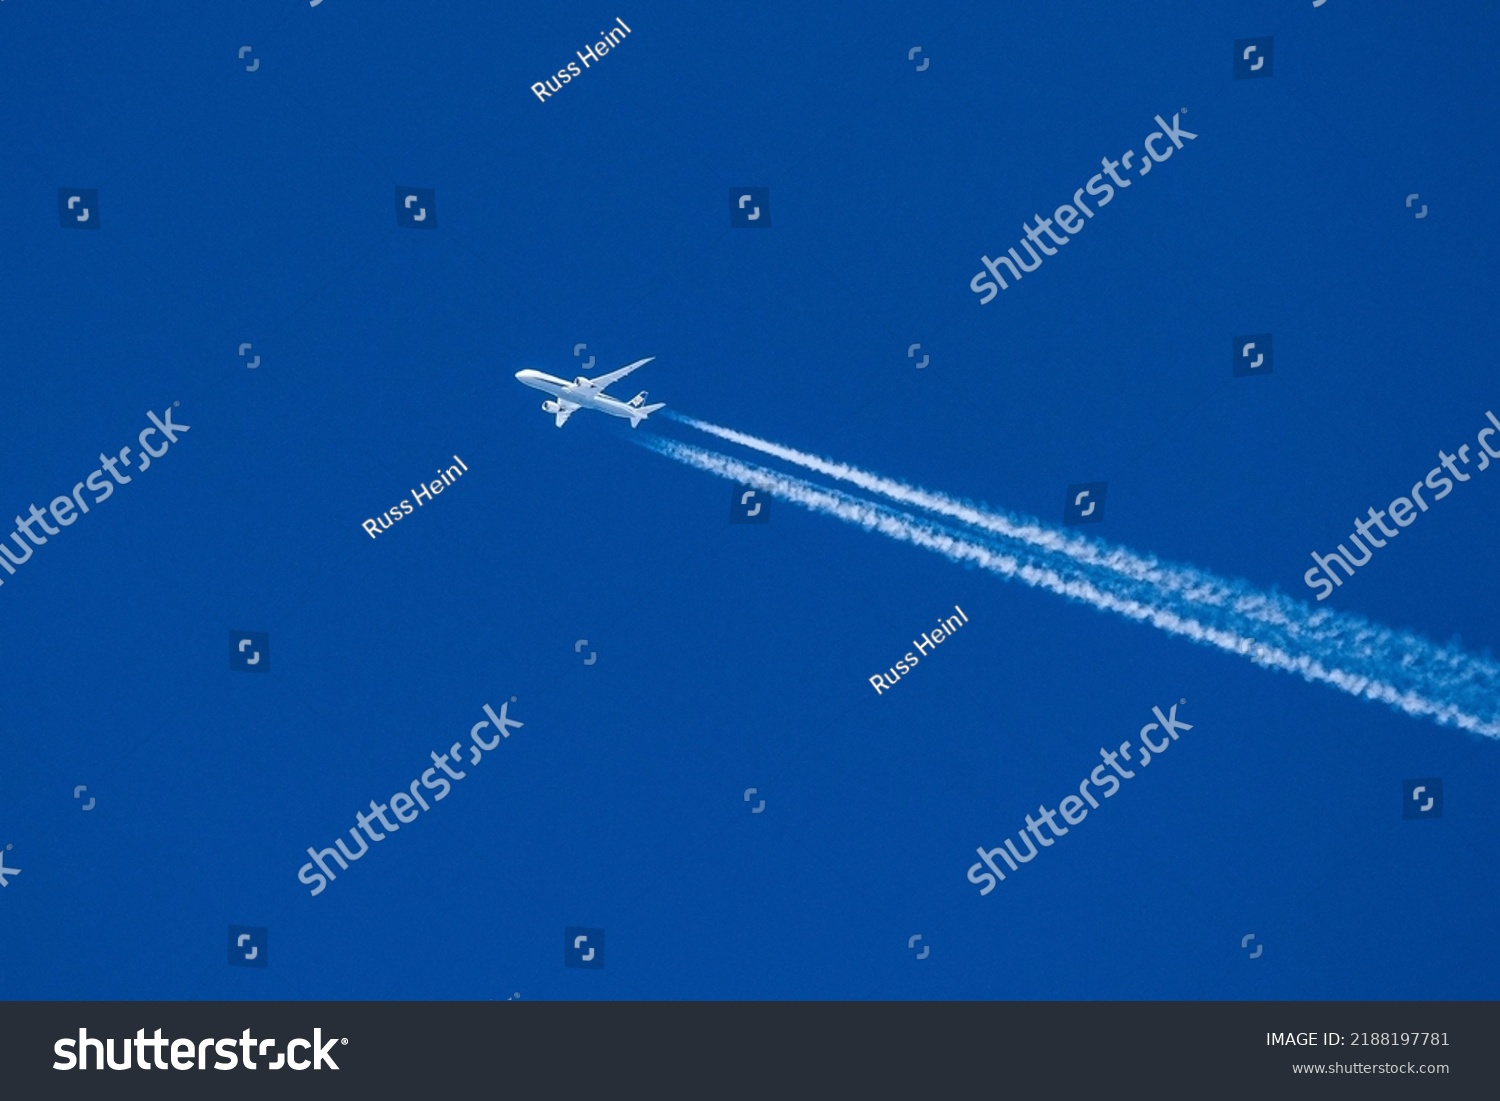 Sharp telephoto close-up of jet plane aircraft with contrails cruising from Tokyo to Chicago, altitude AGL 39,000 feet, ground speed 556 knots. #2188197781